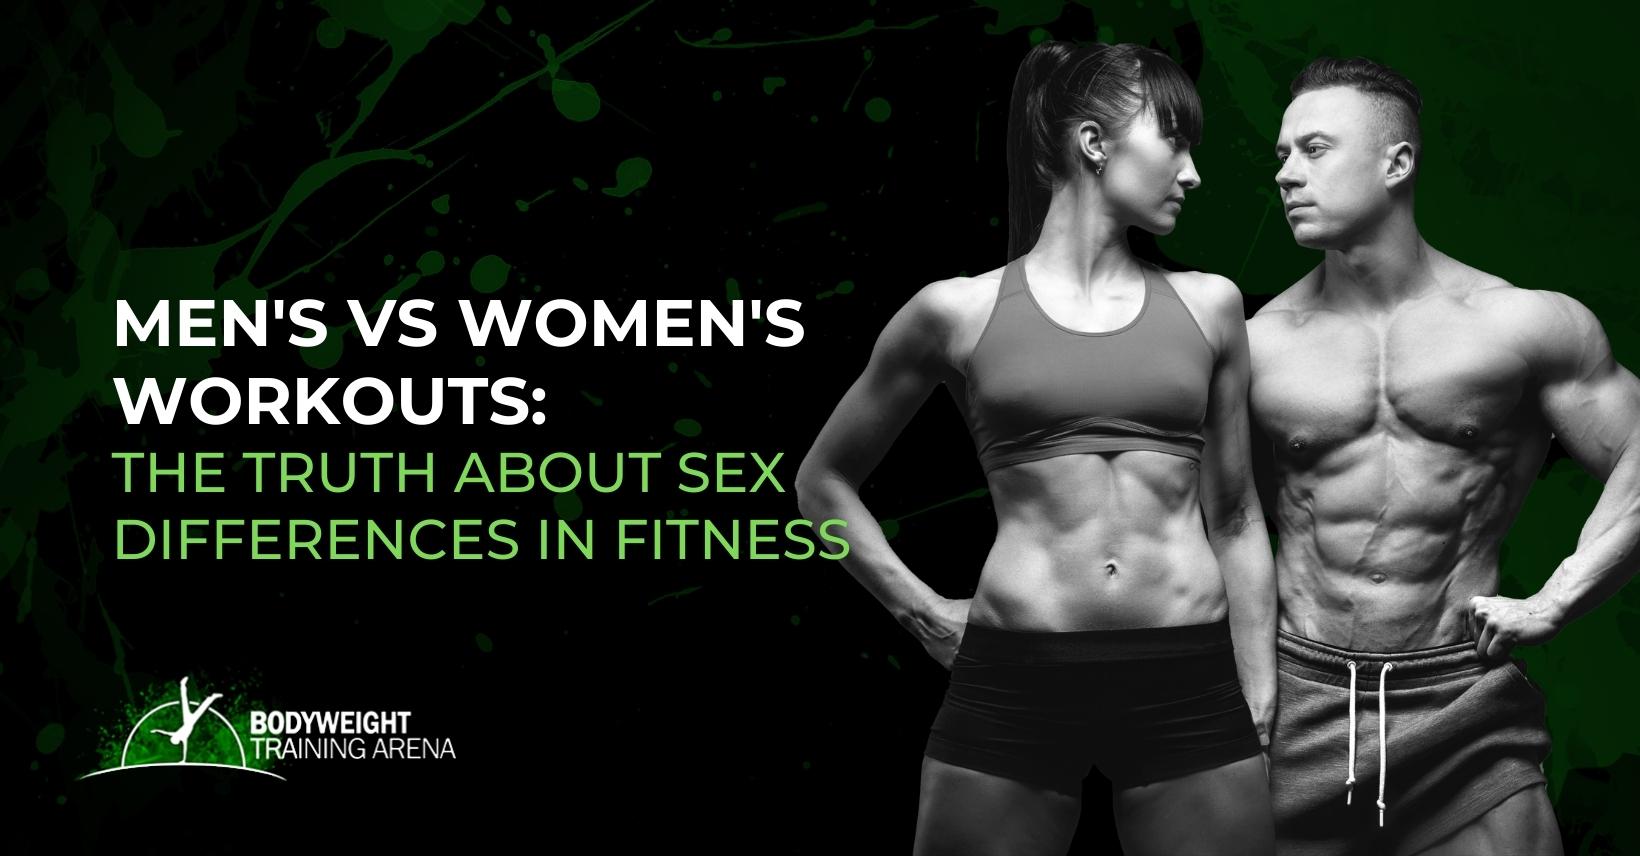 Men’s vs Women’s Workouts: The Truth About Sex Differences in Fitness